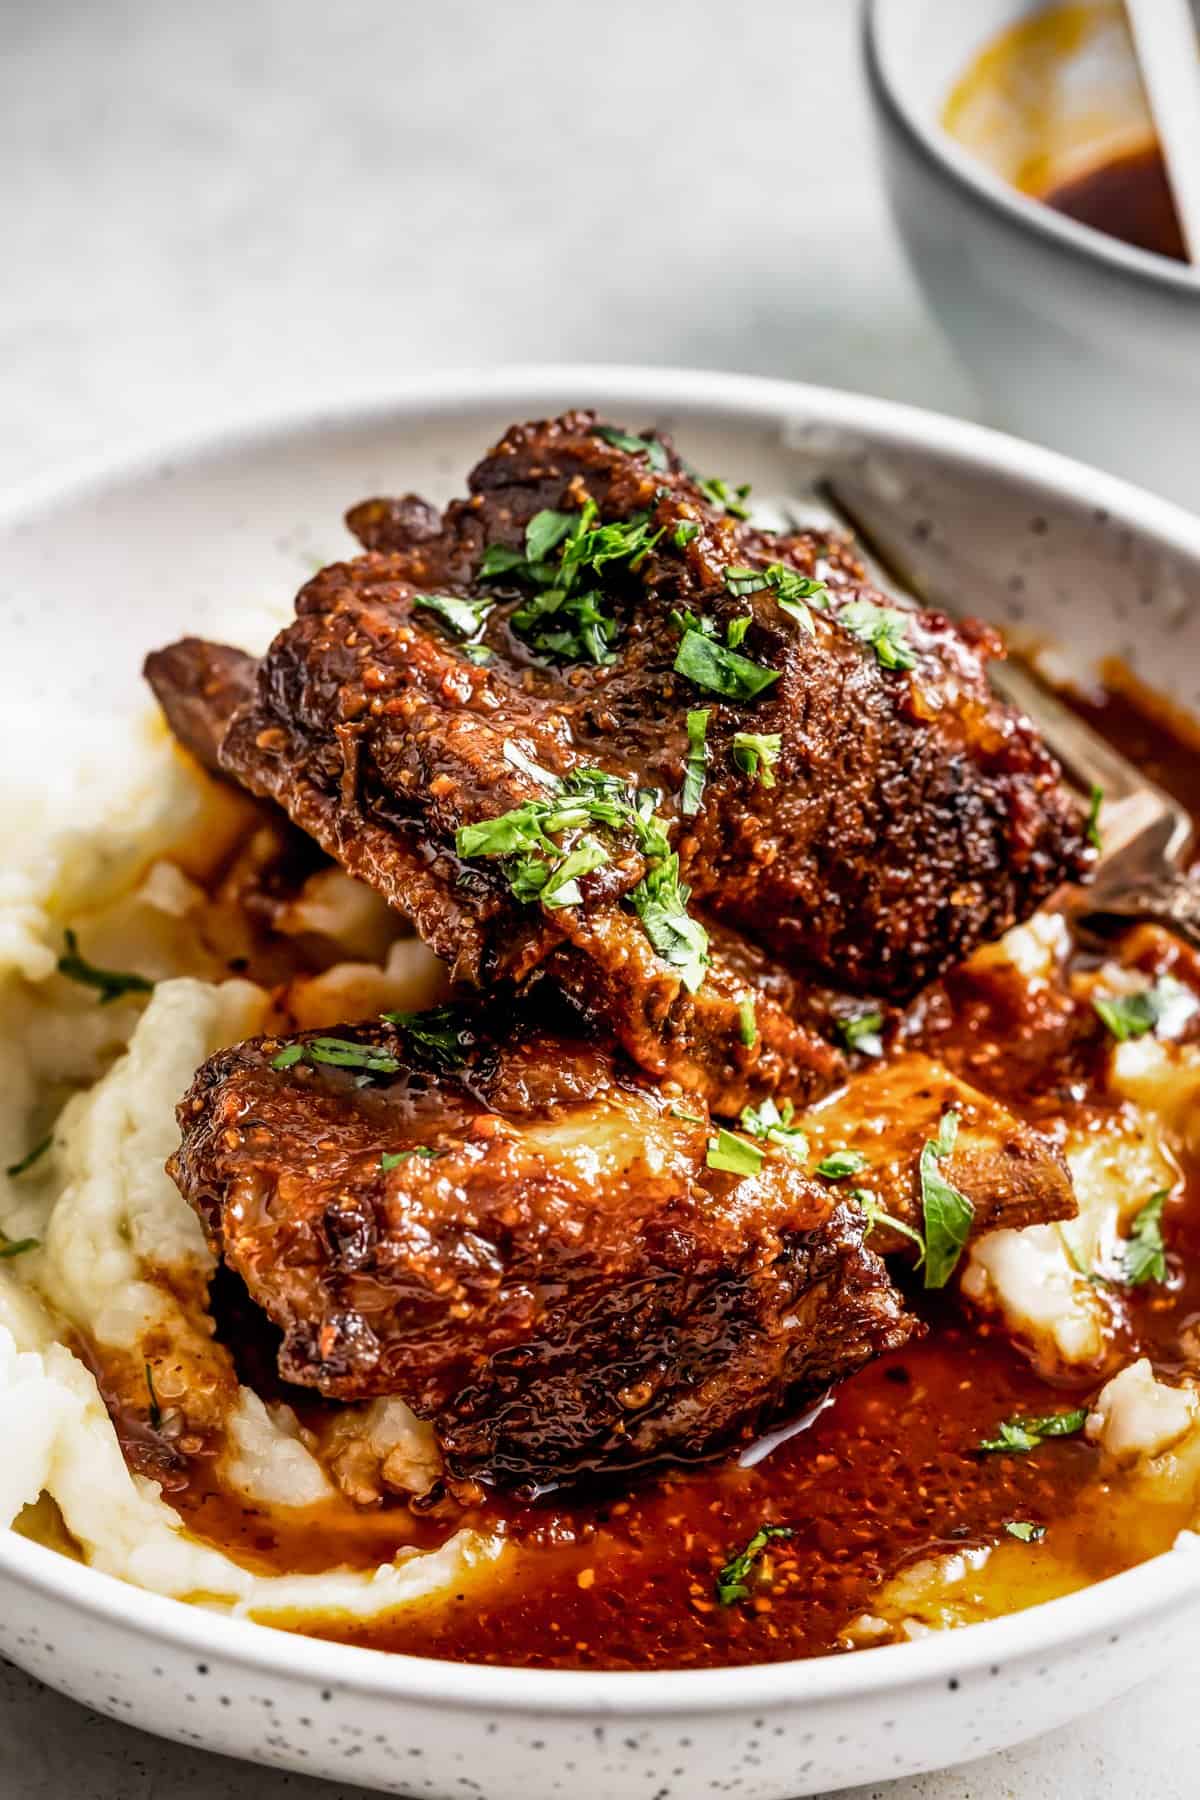 Instant pot short ribs served over mashed potatoes and garnished with parsley.